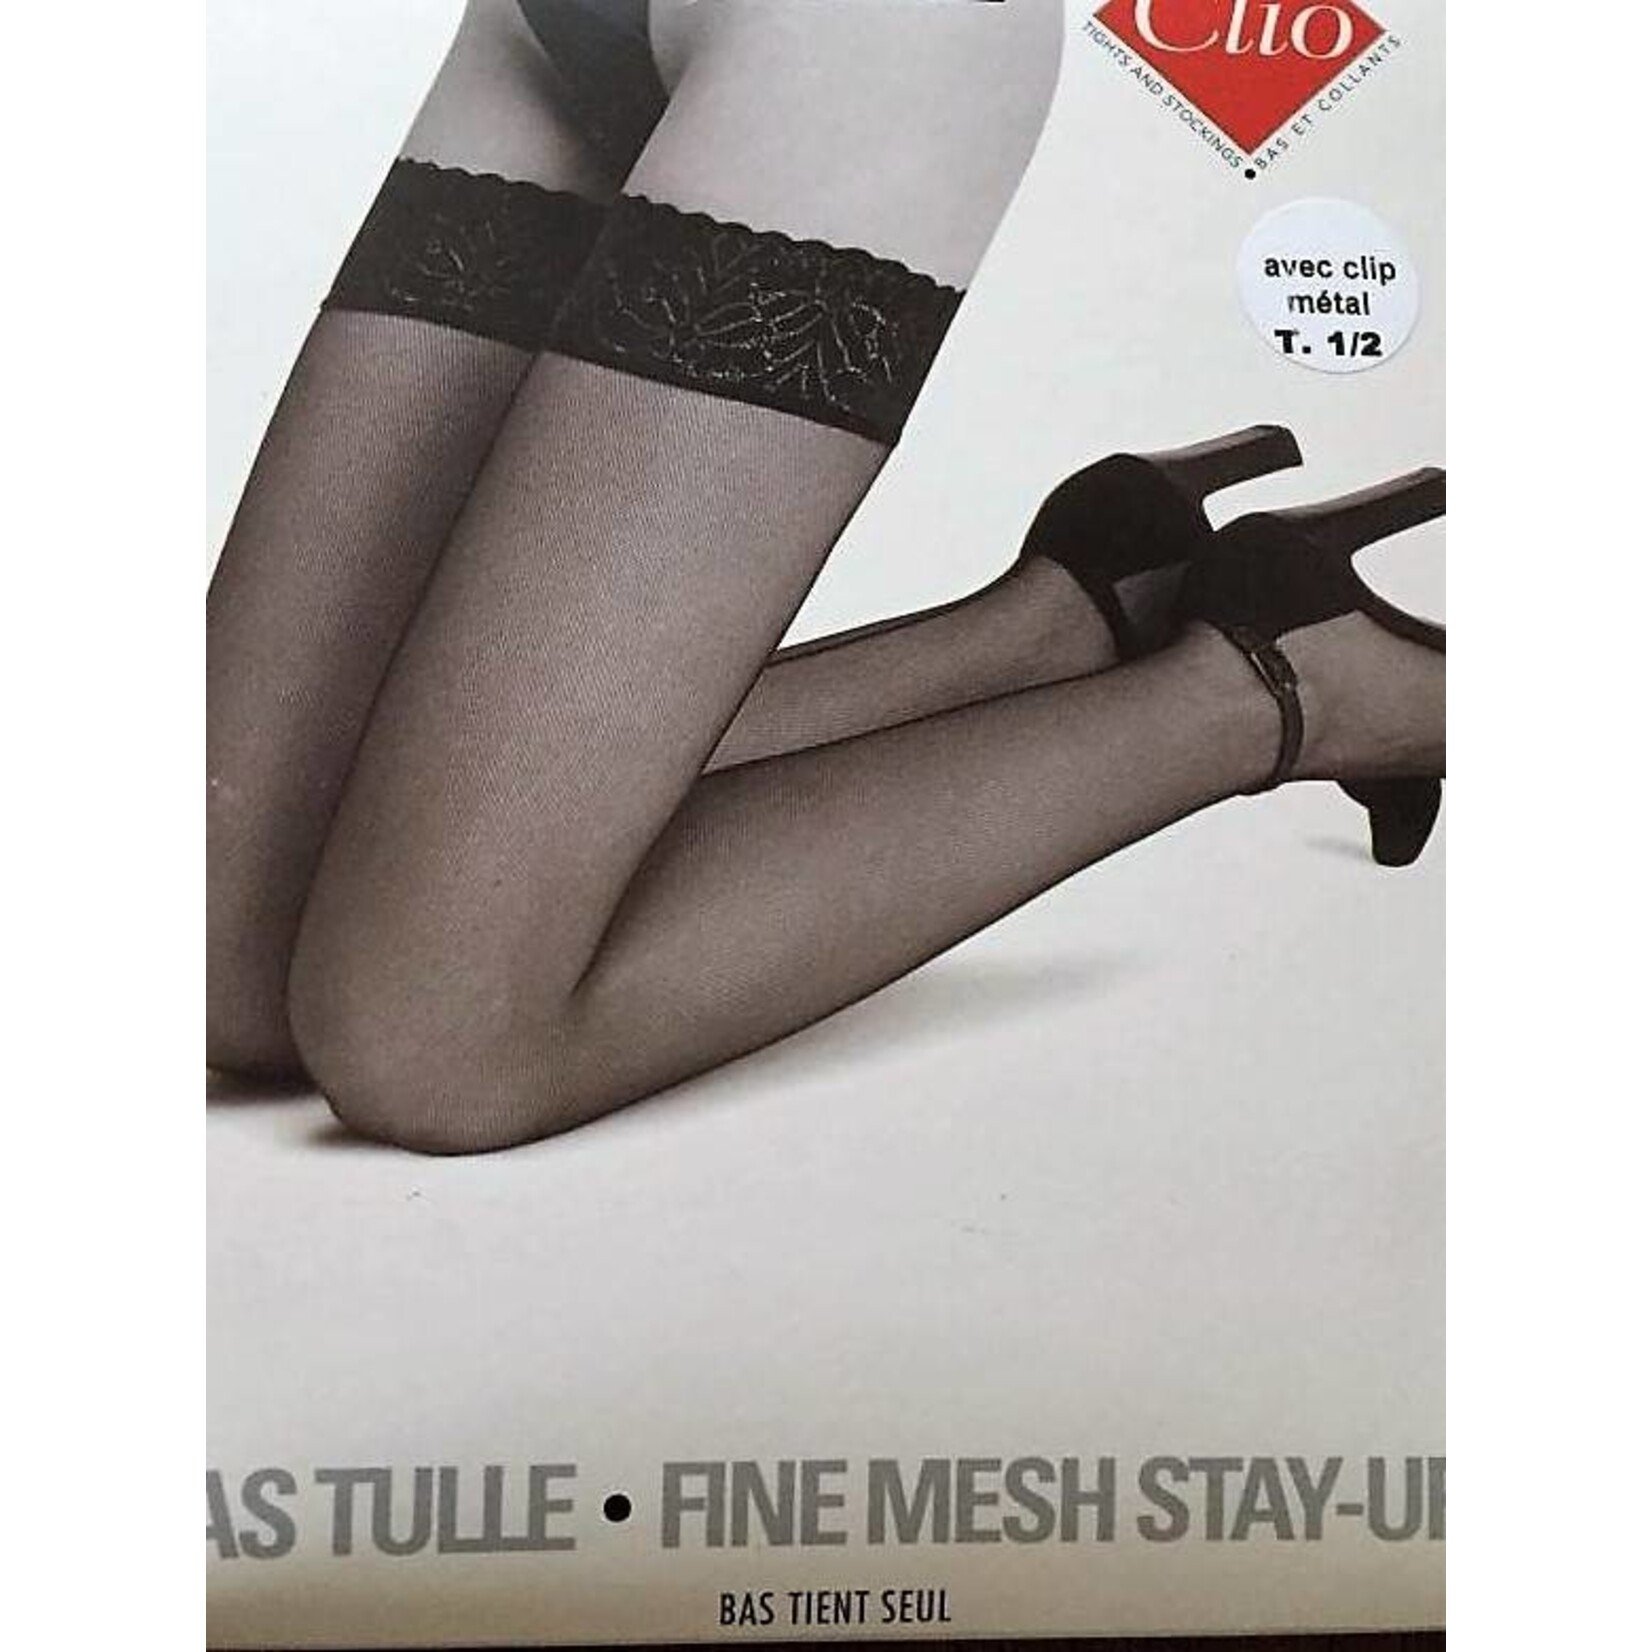 Clio Clio Fine Mesh naad Stay Up's met Clips in Top